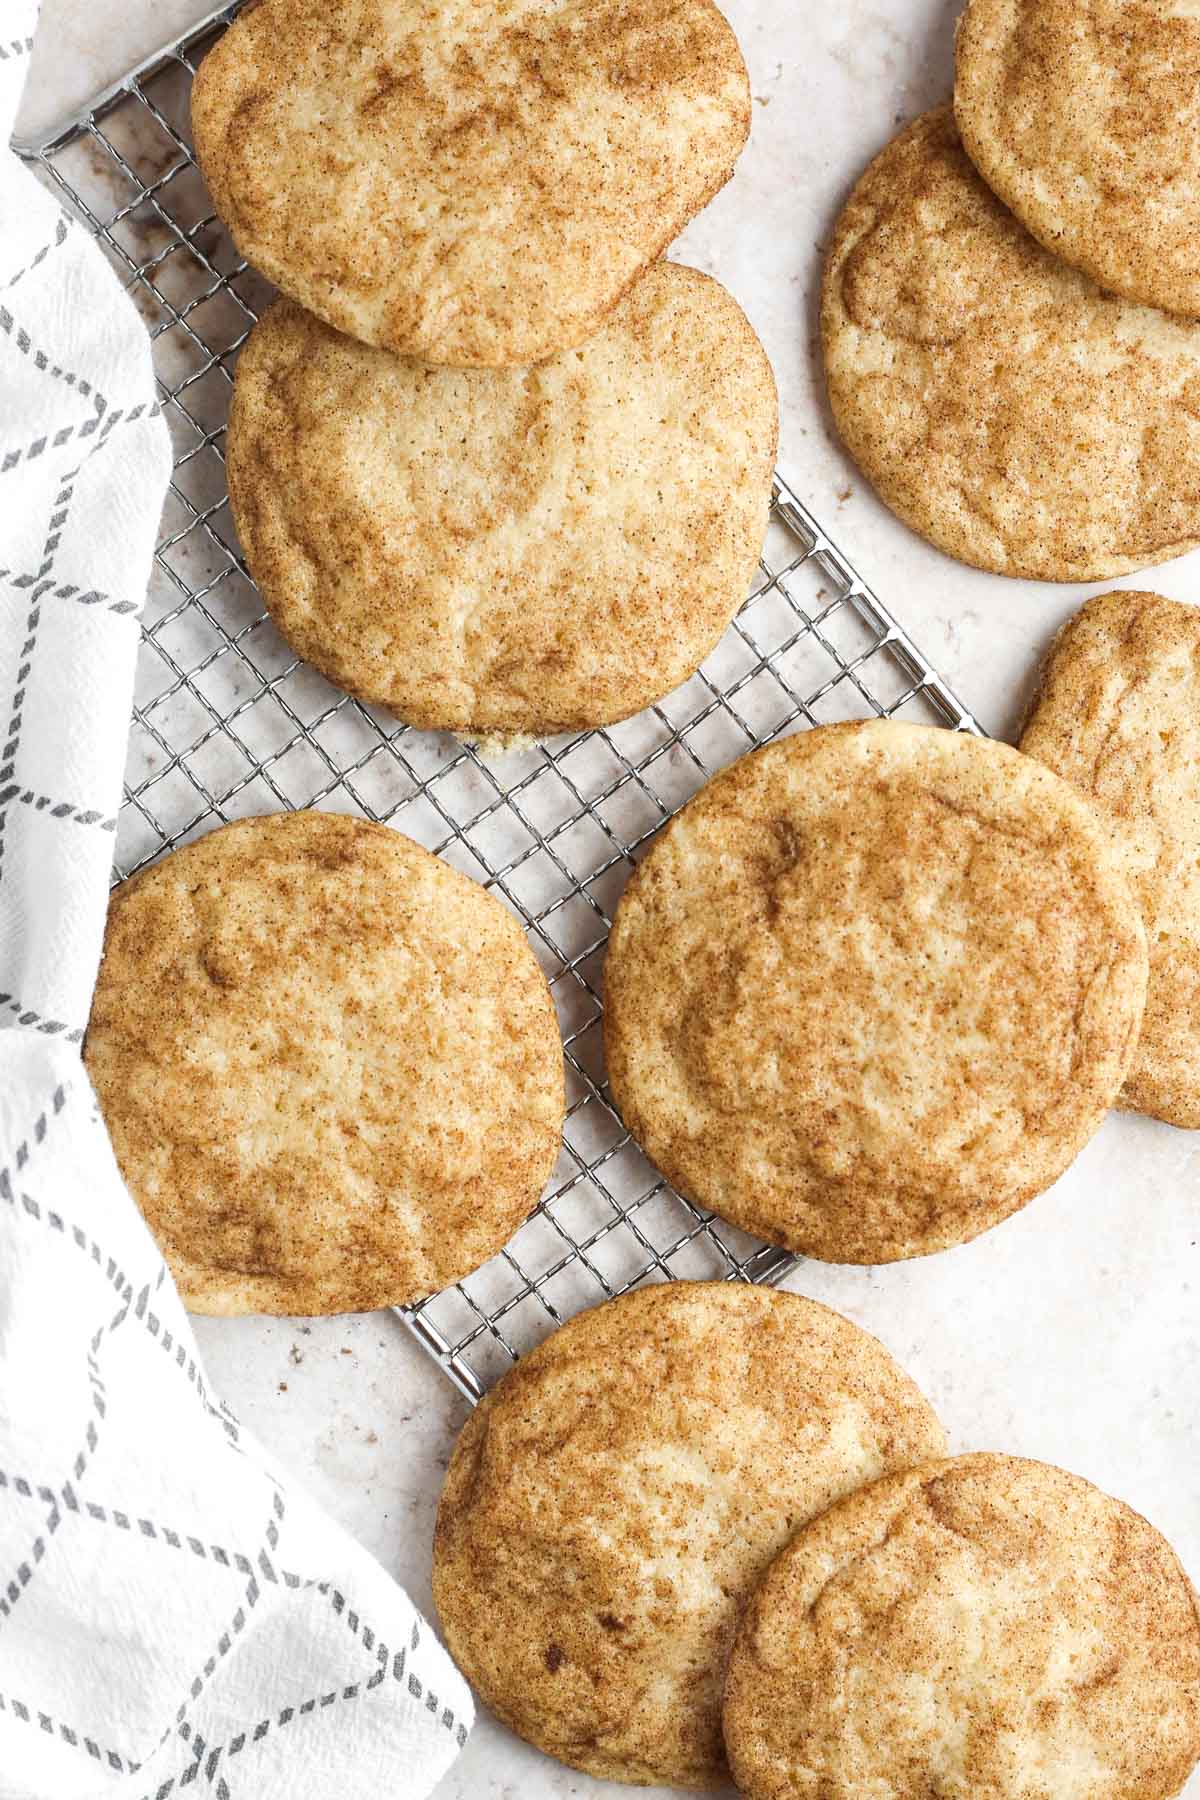 baked snickerdoodle cookies on a wire tray.